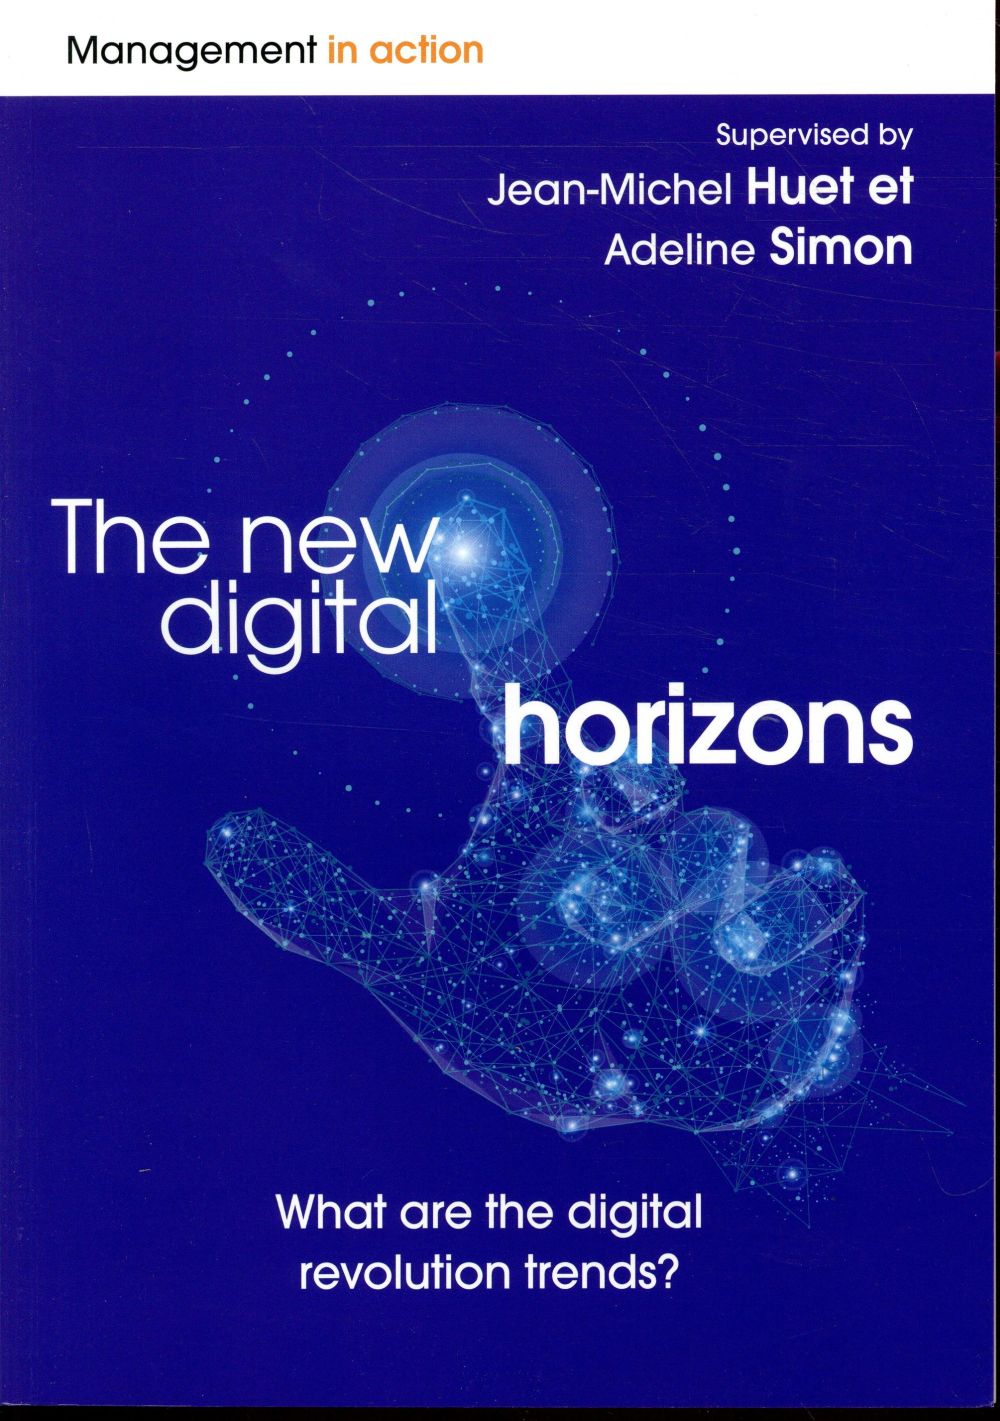 The new digital horizons - what are the digital revolution trends?